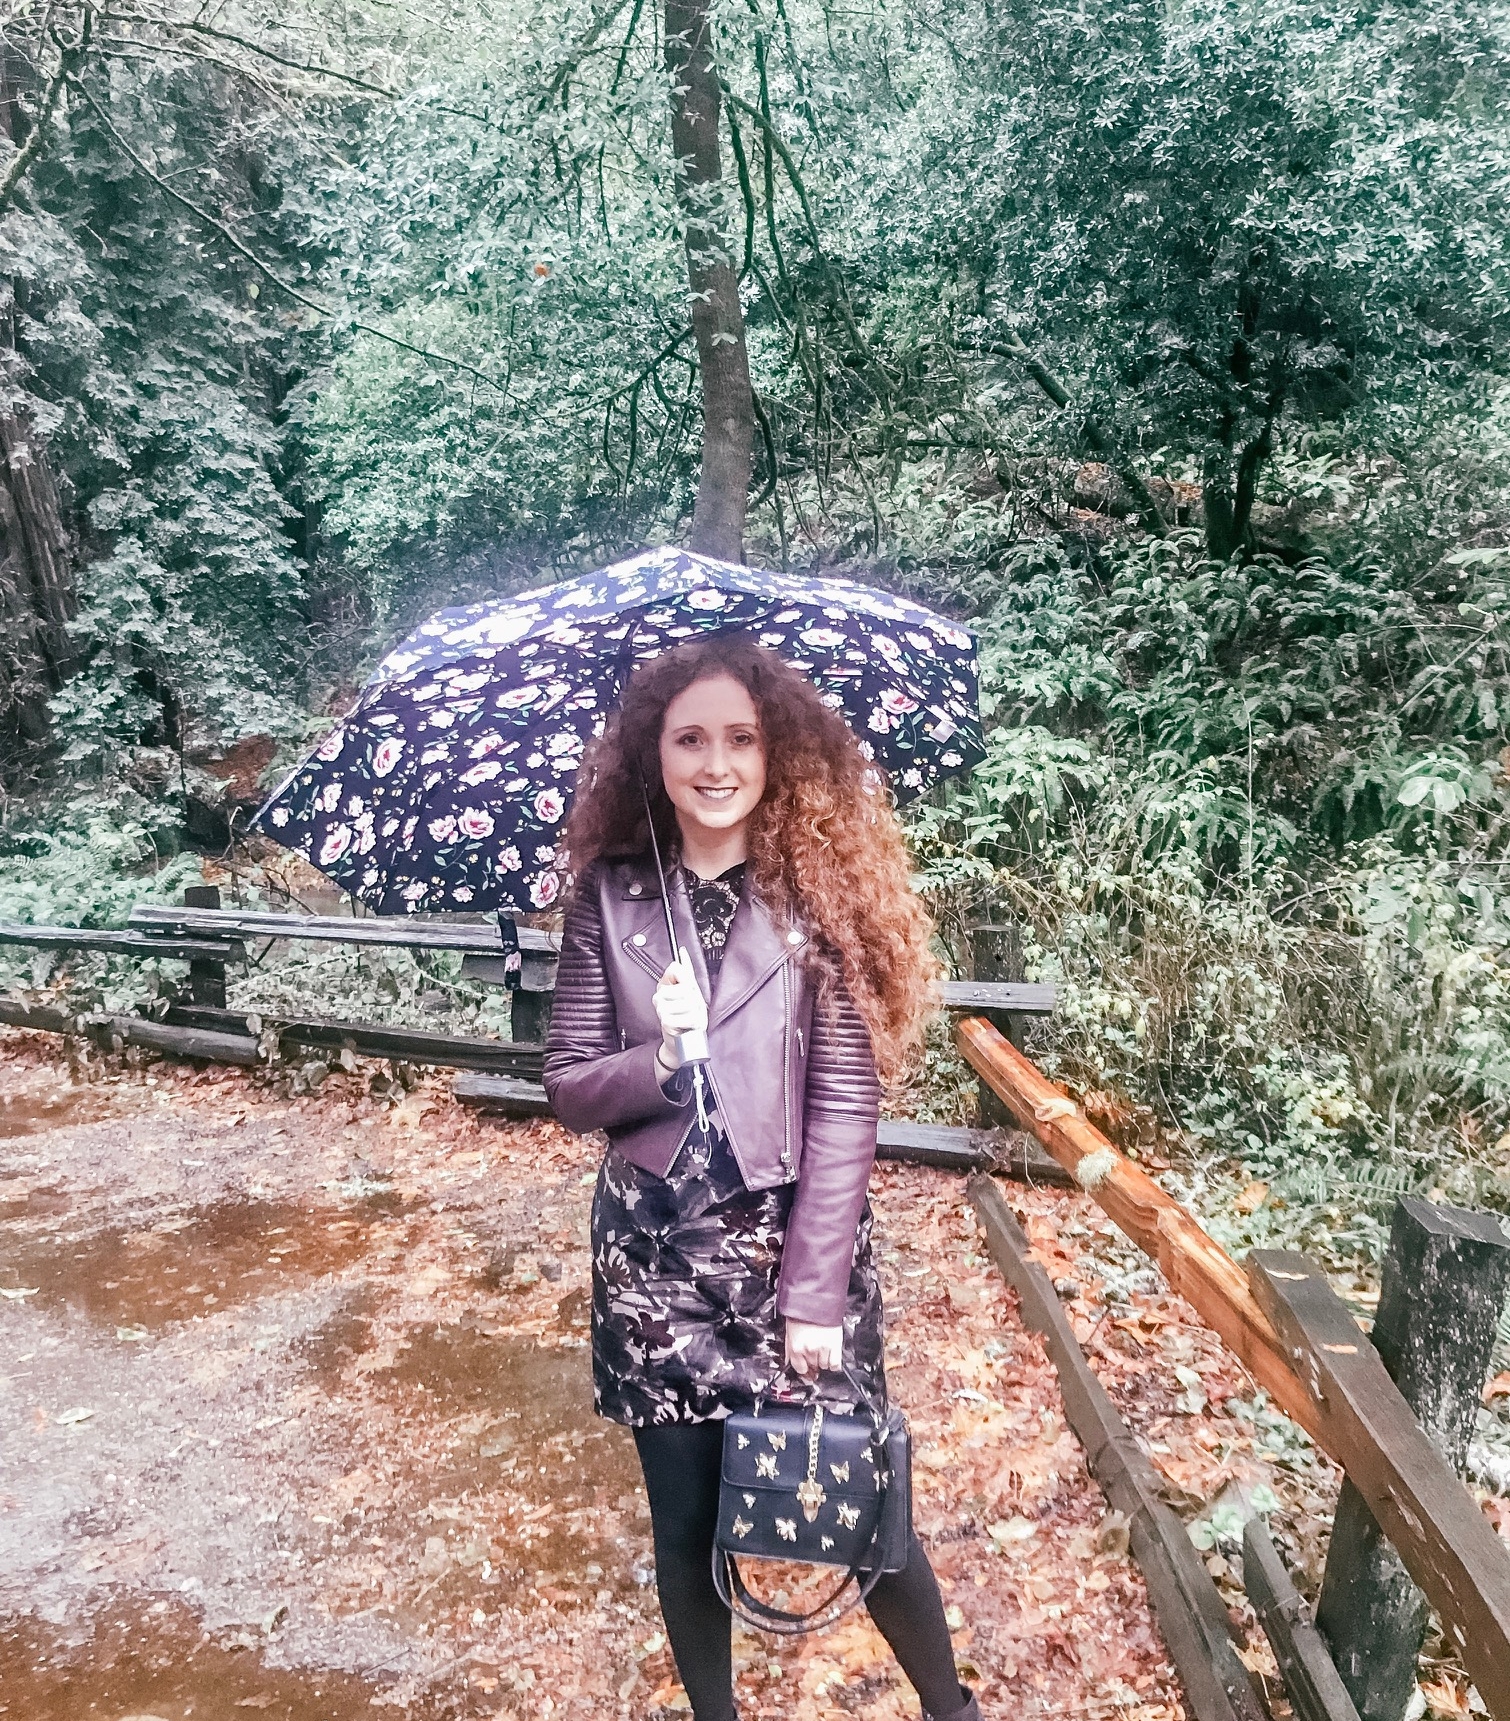 Muir Woods, Sonoma &amp; Napa Valley Tour Review with Extranomical Tours - A little rainy at Muir Woods